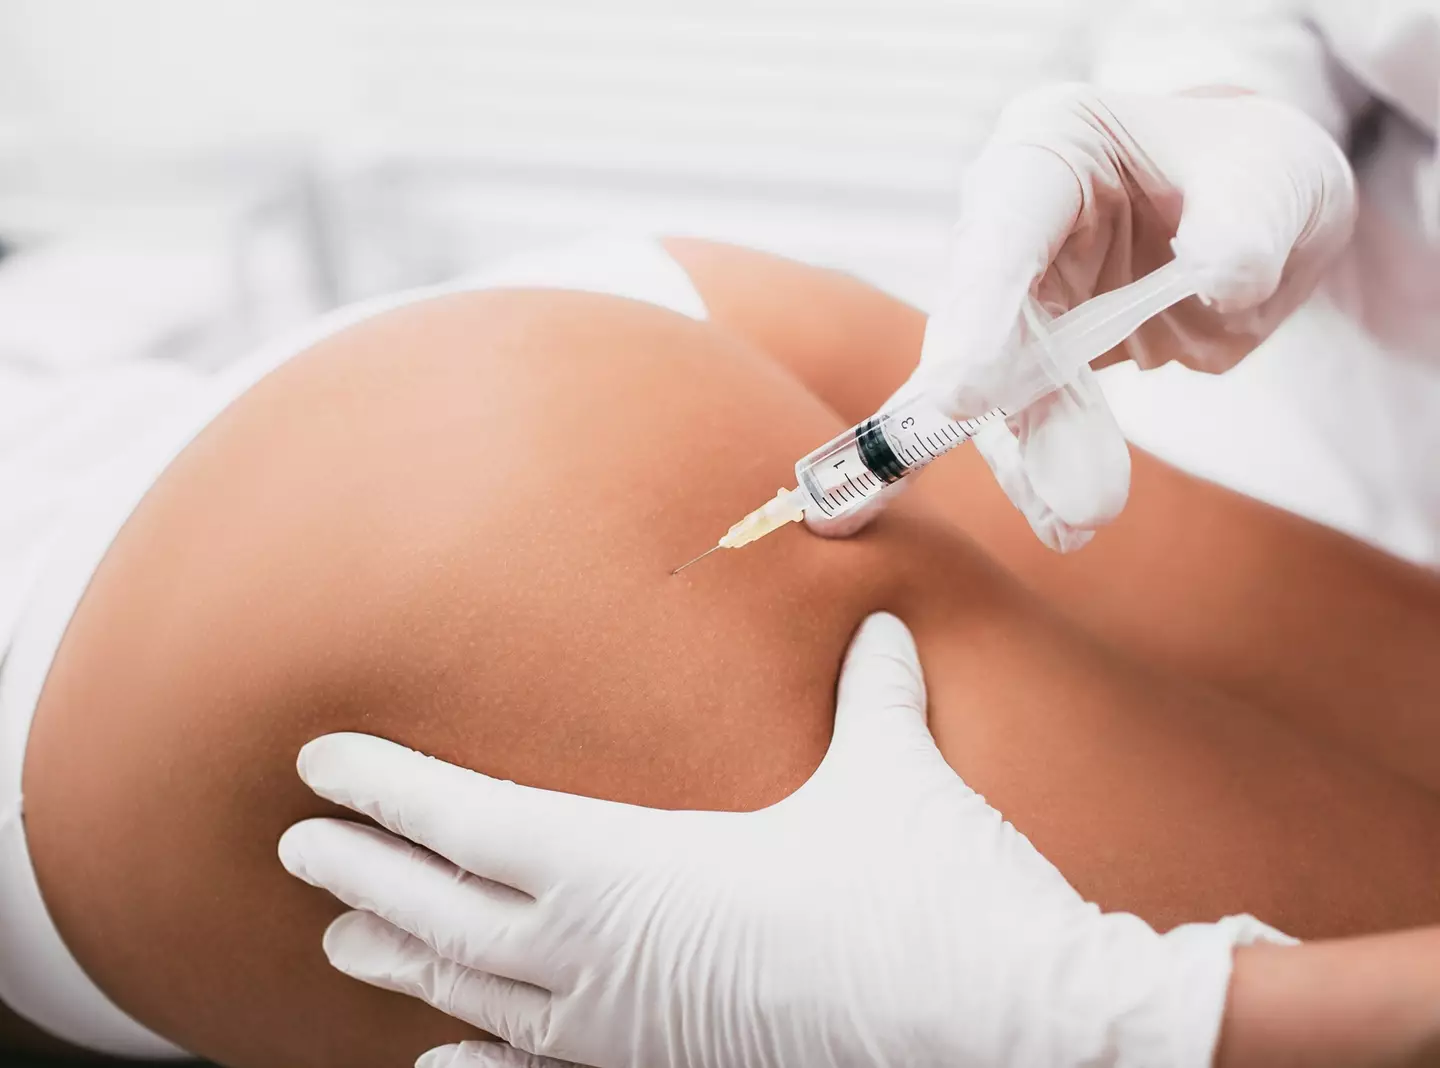 The BBL surgery has the 'highest death rate of all cosmetic procedures'. (peakSTOCK/Getty Images)